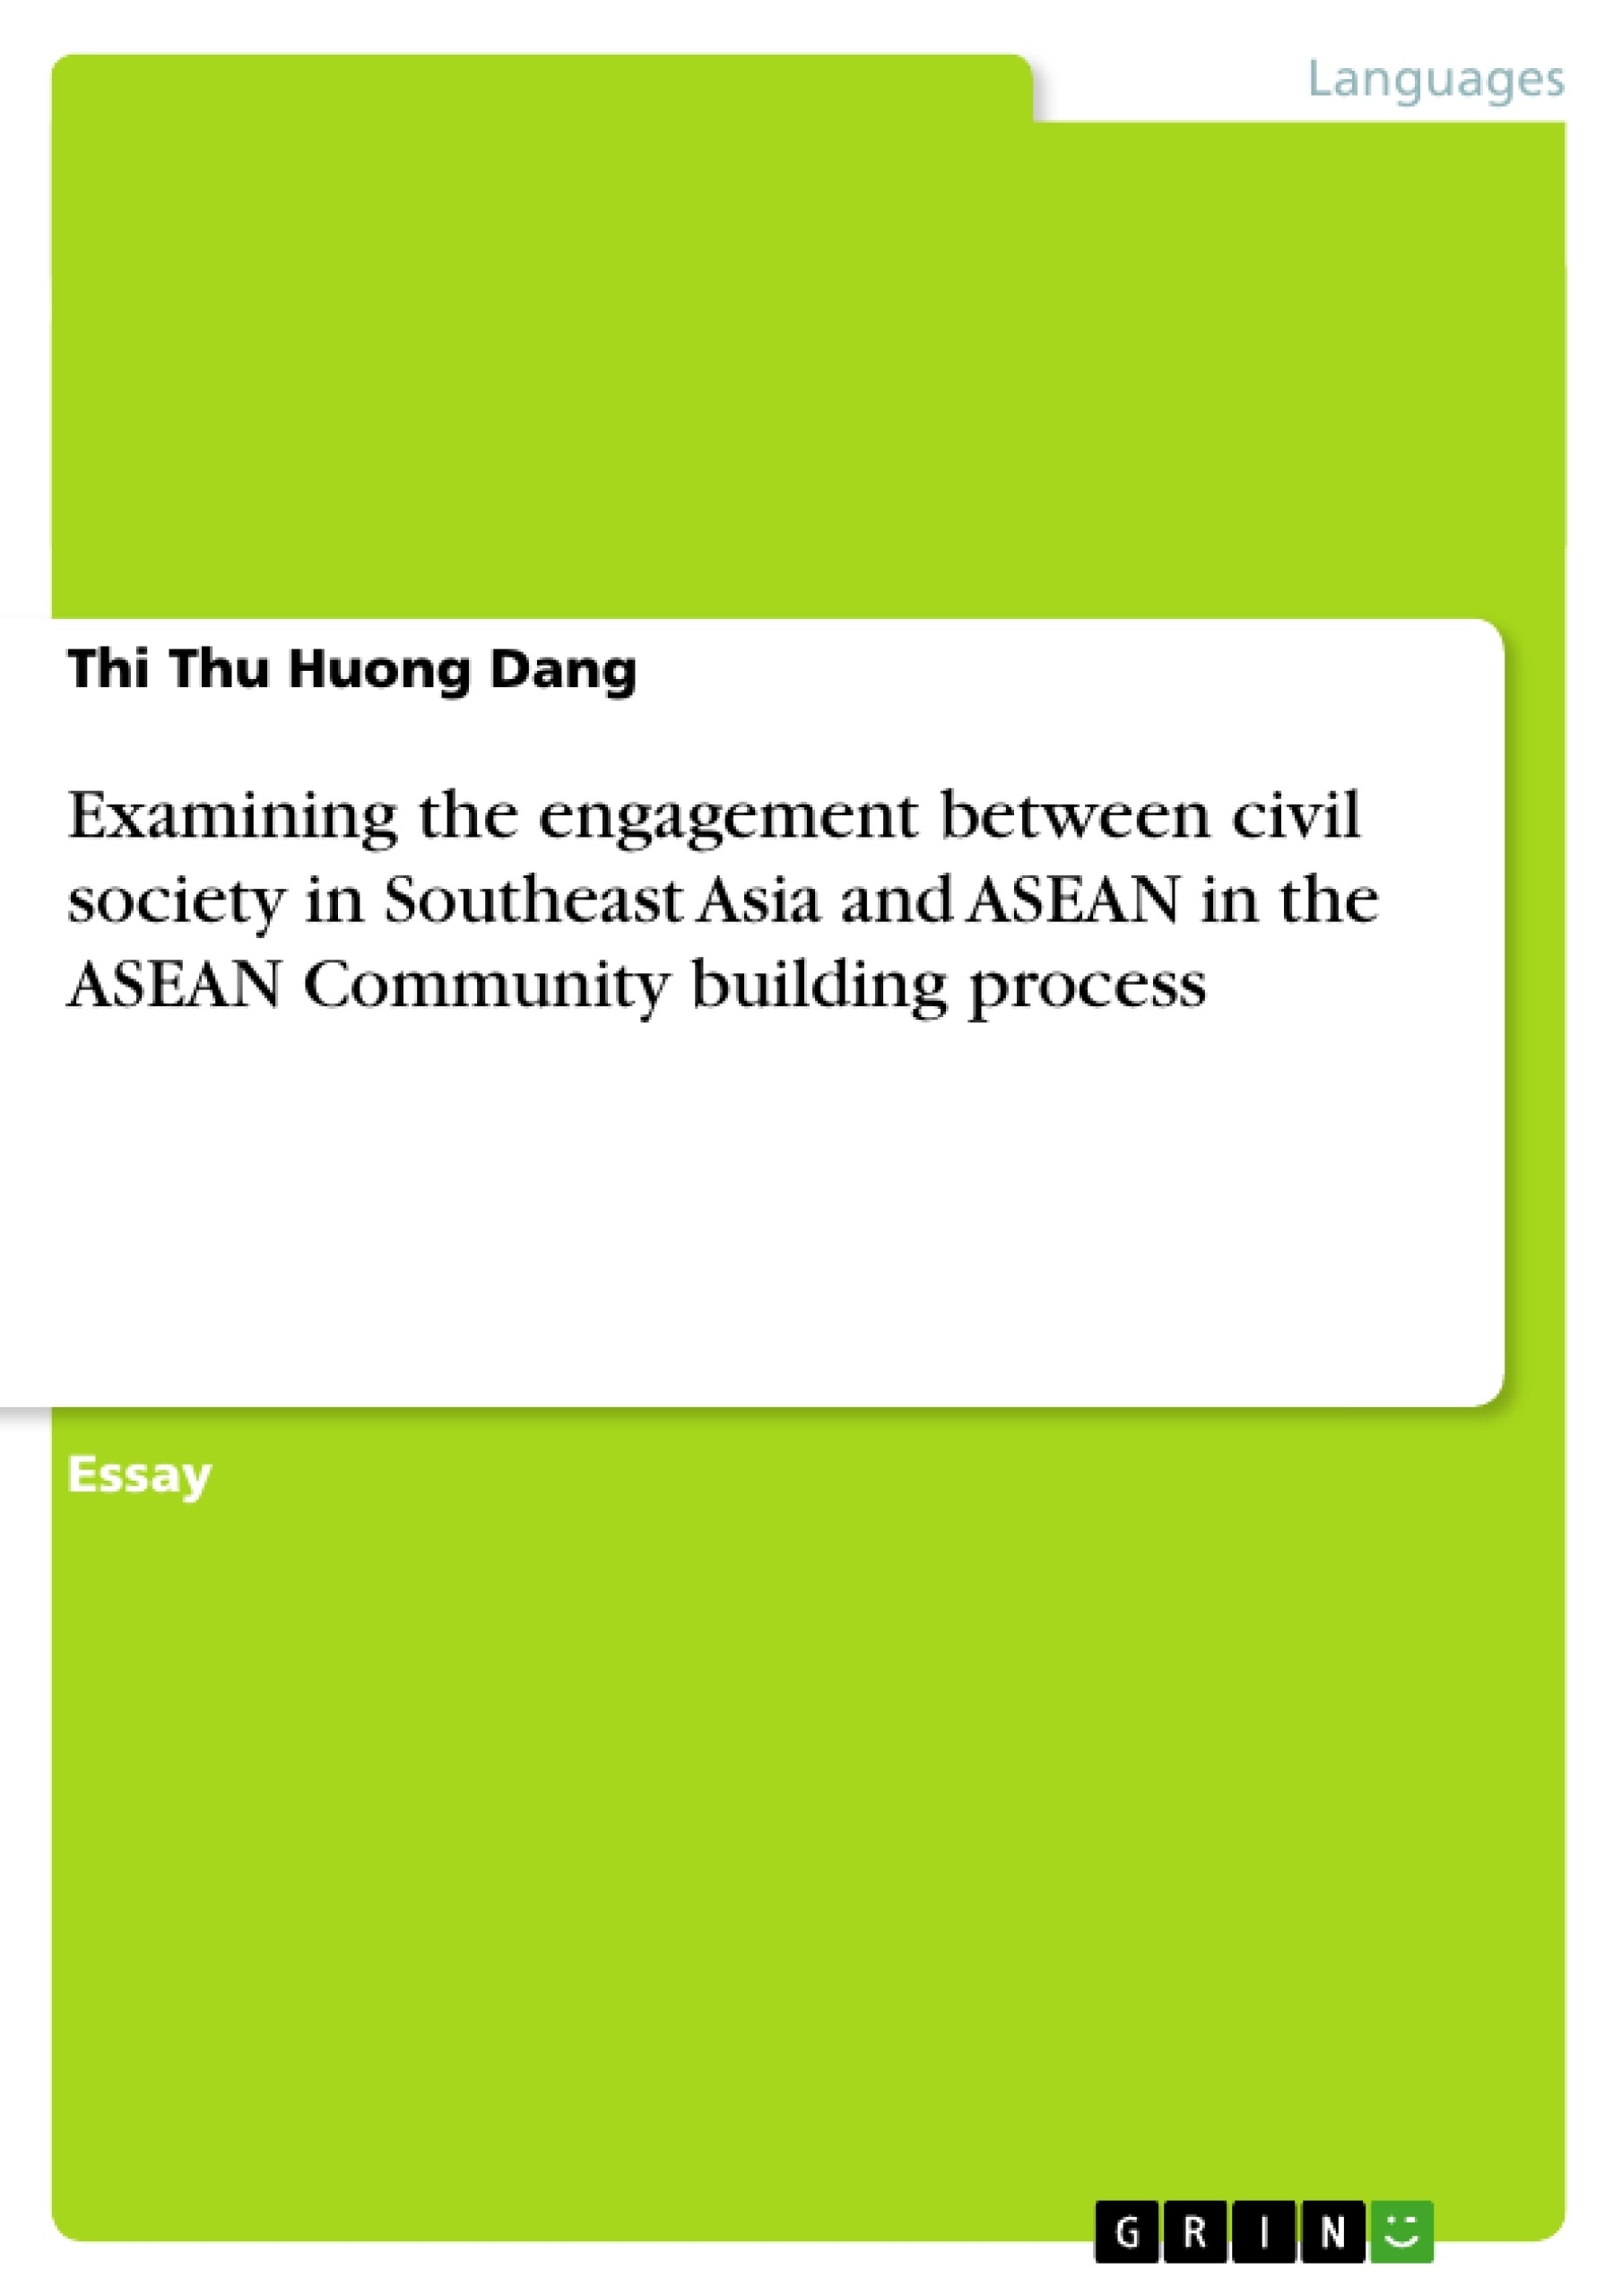 Título: Examining the engagement between civil society in Southeast Asia and ASEAN in the ASEAN Community building process